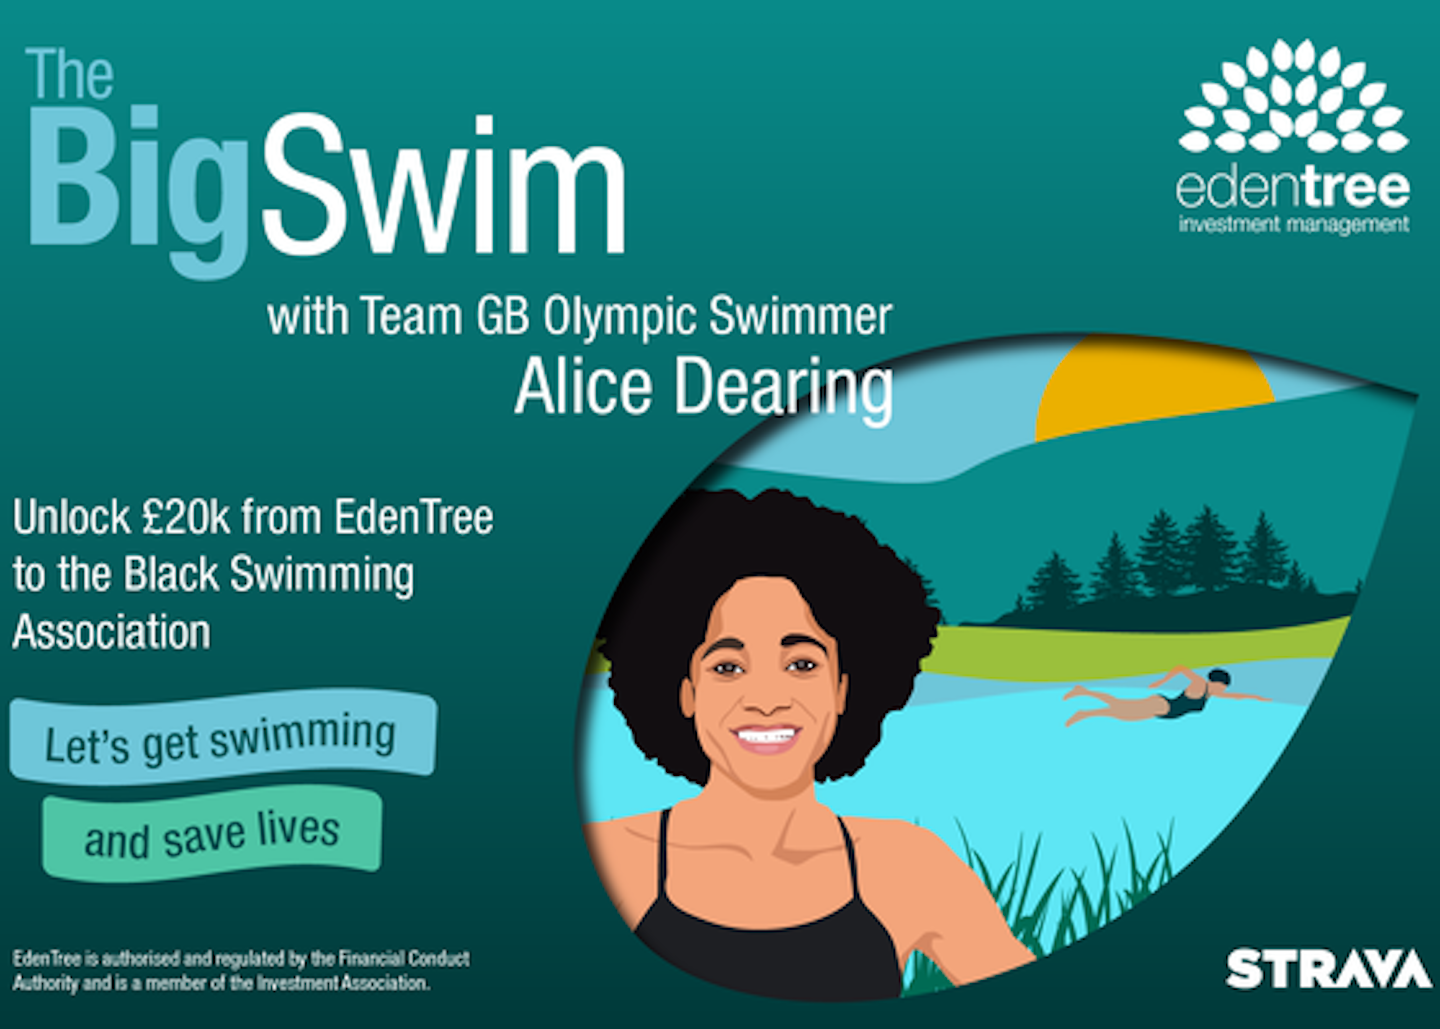 Join in The Big Swim with Team GB Olympic swimmer Alice Dearing